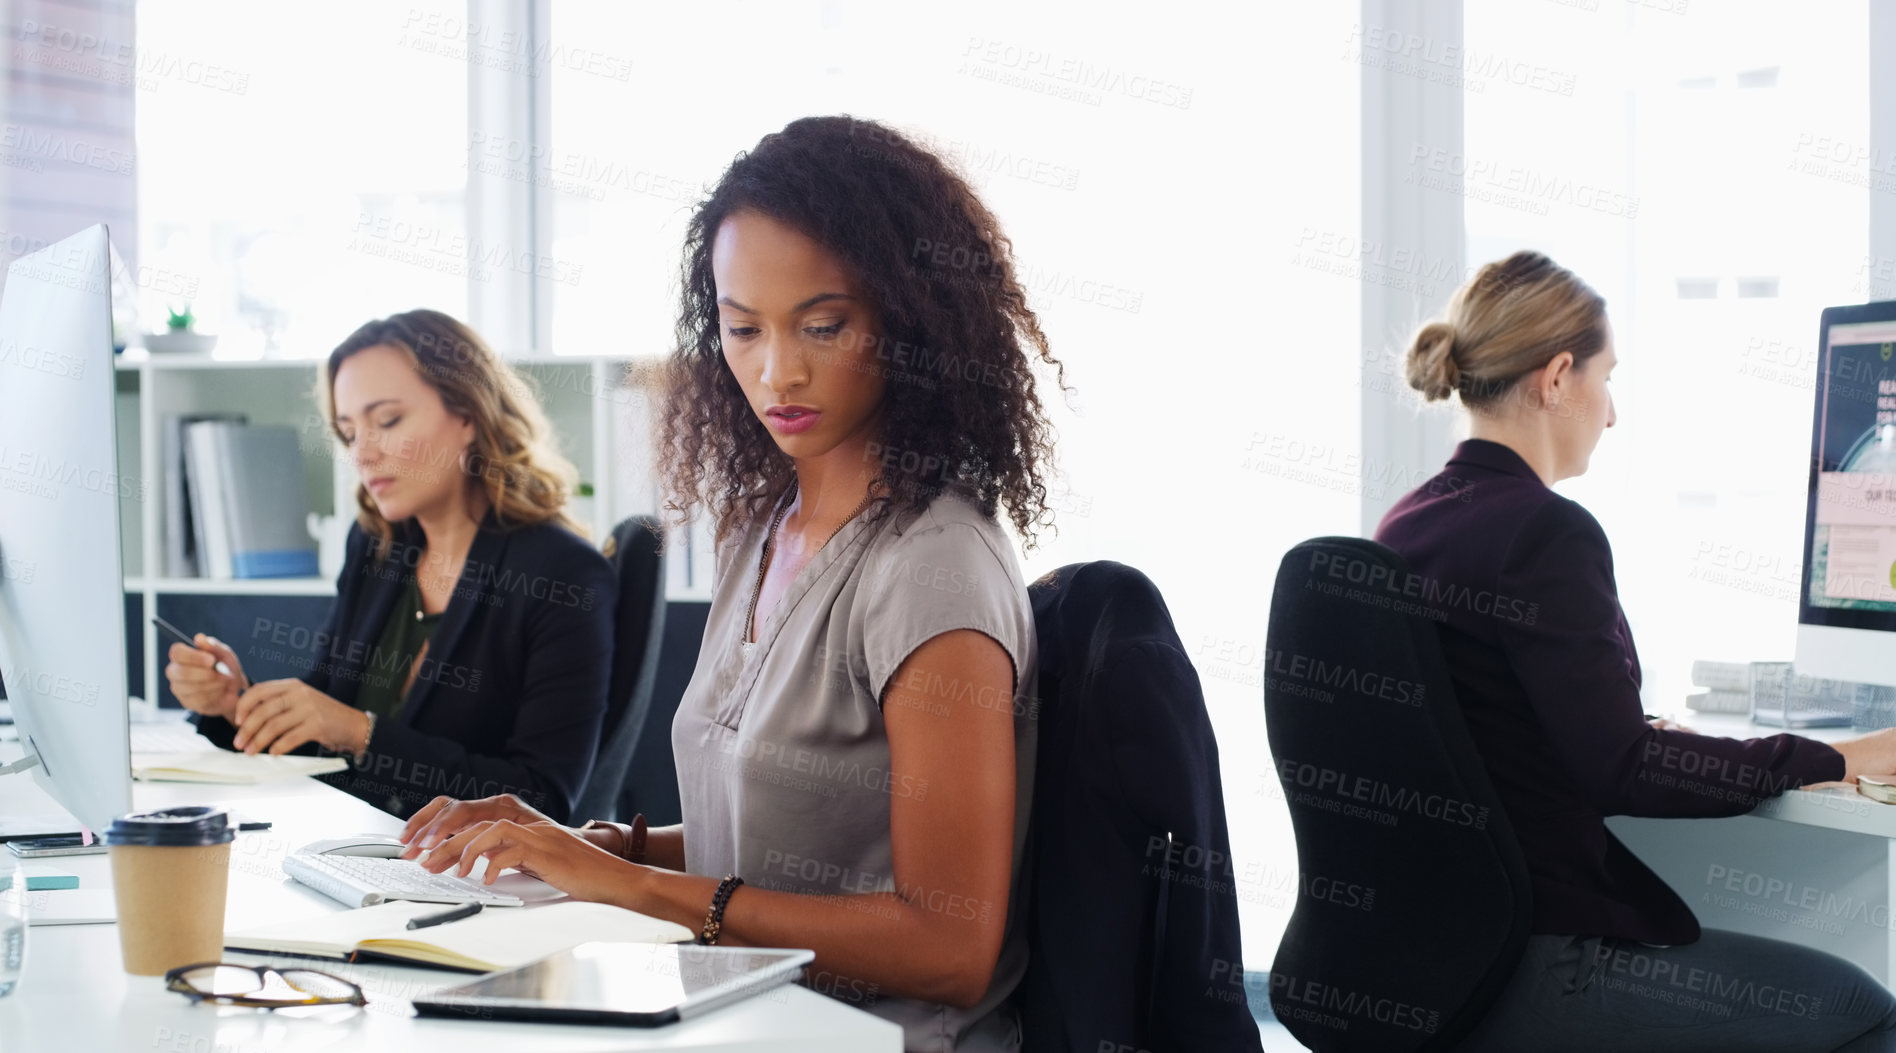 Buy stock photo Shot of a group of young businesswomen using their computers in a modern office